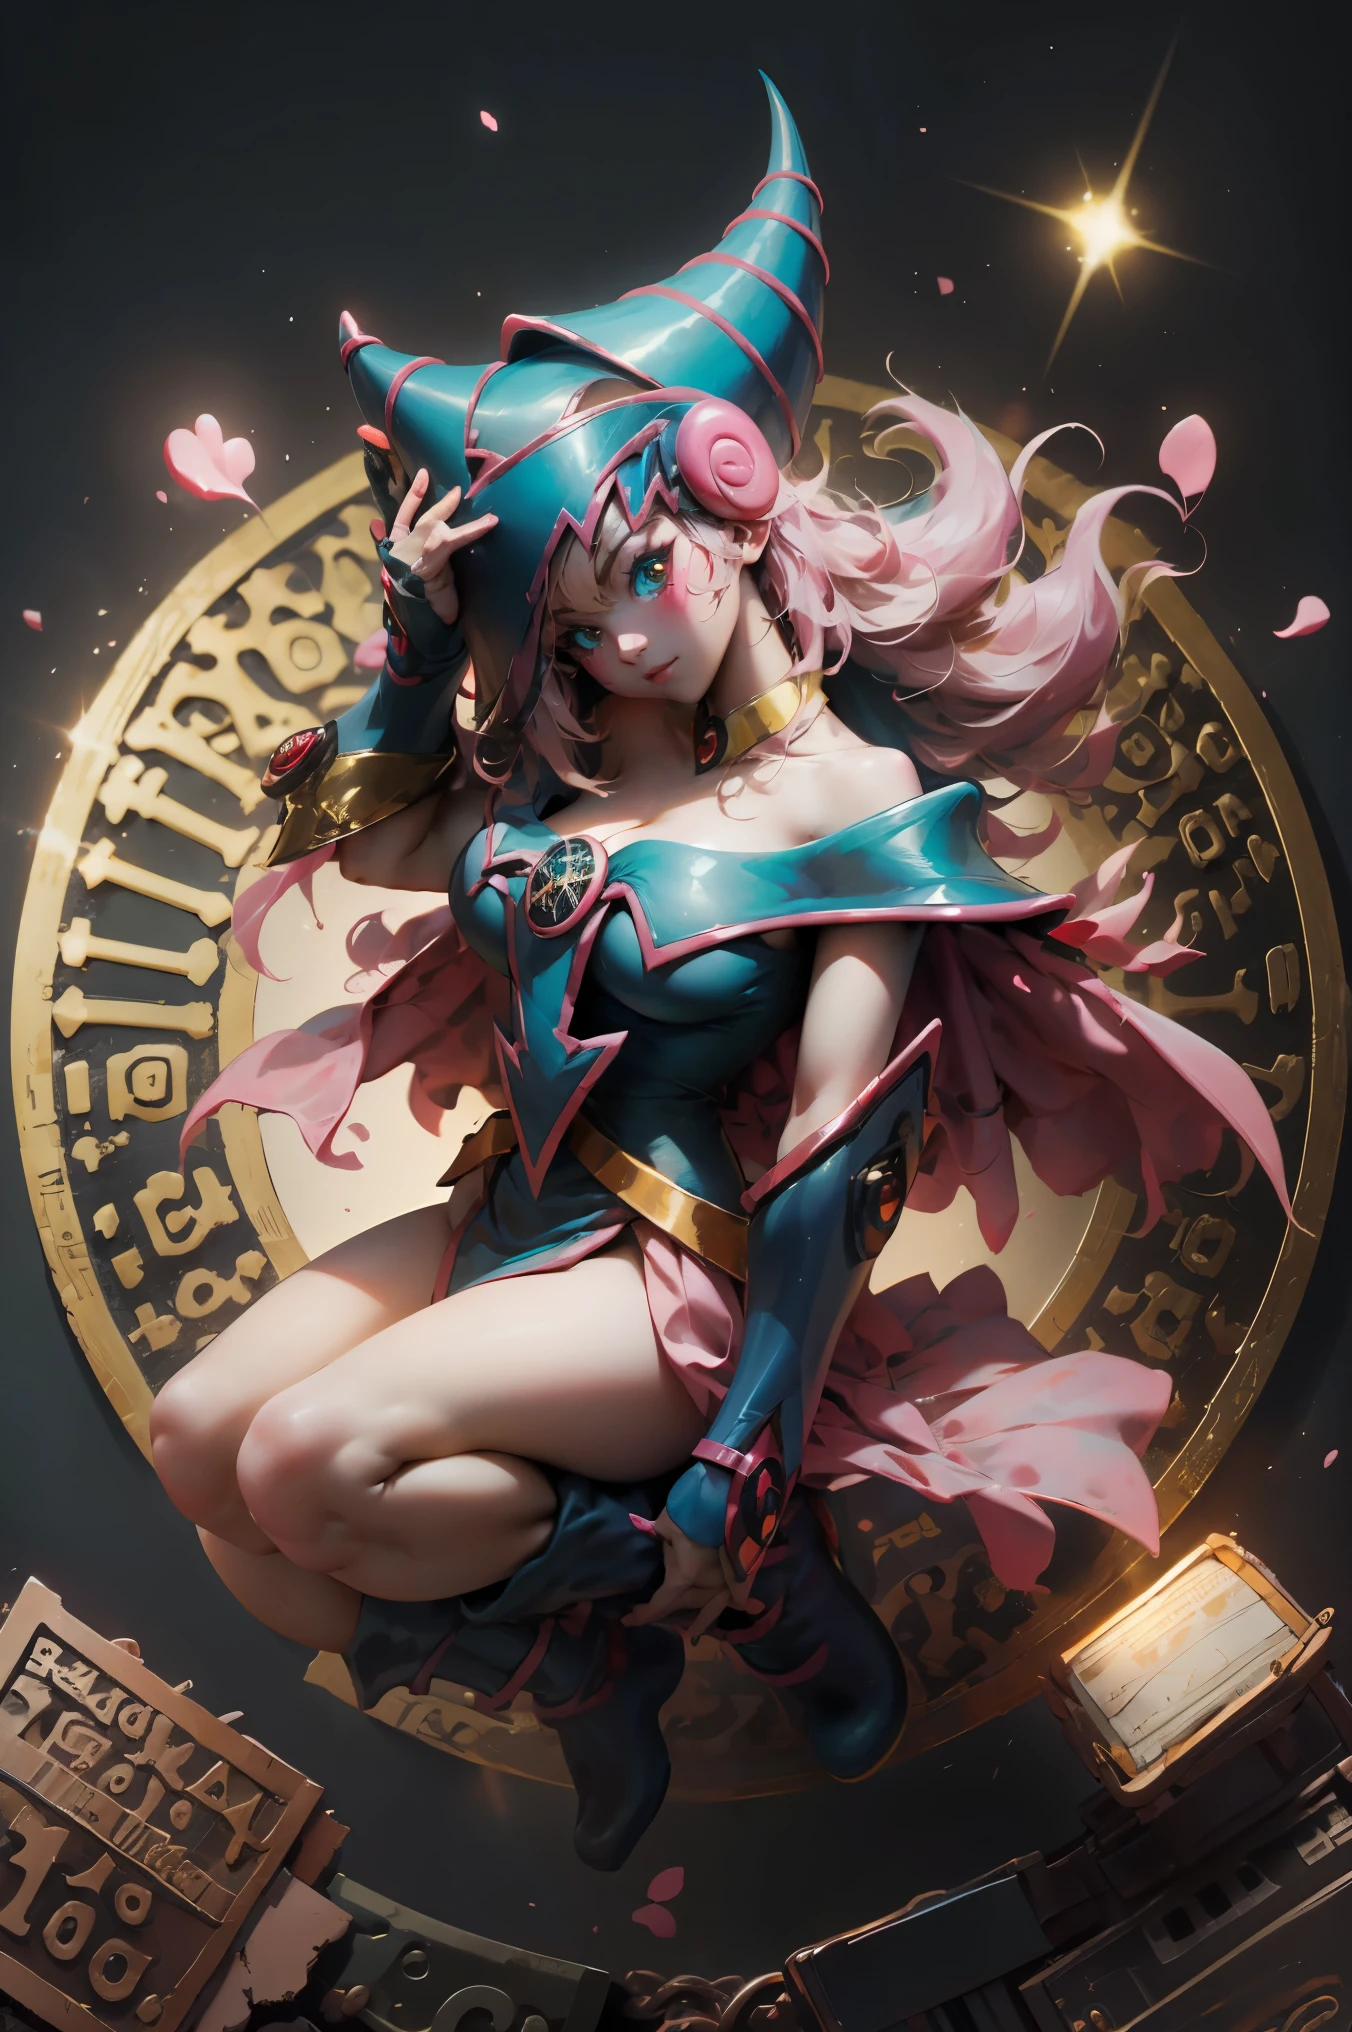 (masterpiece:1.2), (The best quality:1.2), perfect lighting, Dark Magician Girl casting a spell, blue eyes, Long blonde hair, Red lips. floating in the air, big tits, neckline, magic background. Transparent hearts in the air, blue robe, big hat, from above, Sparkles, Yugioh Card in the background. In heels.